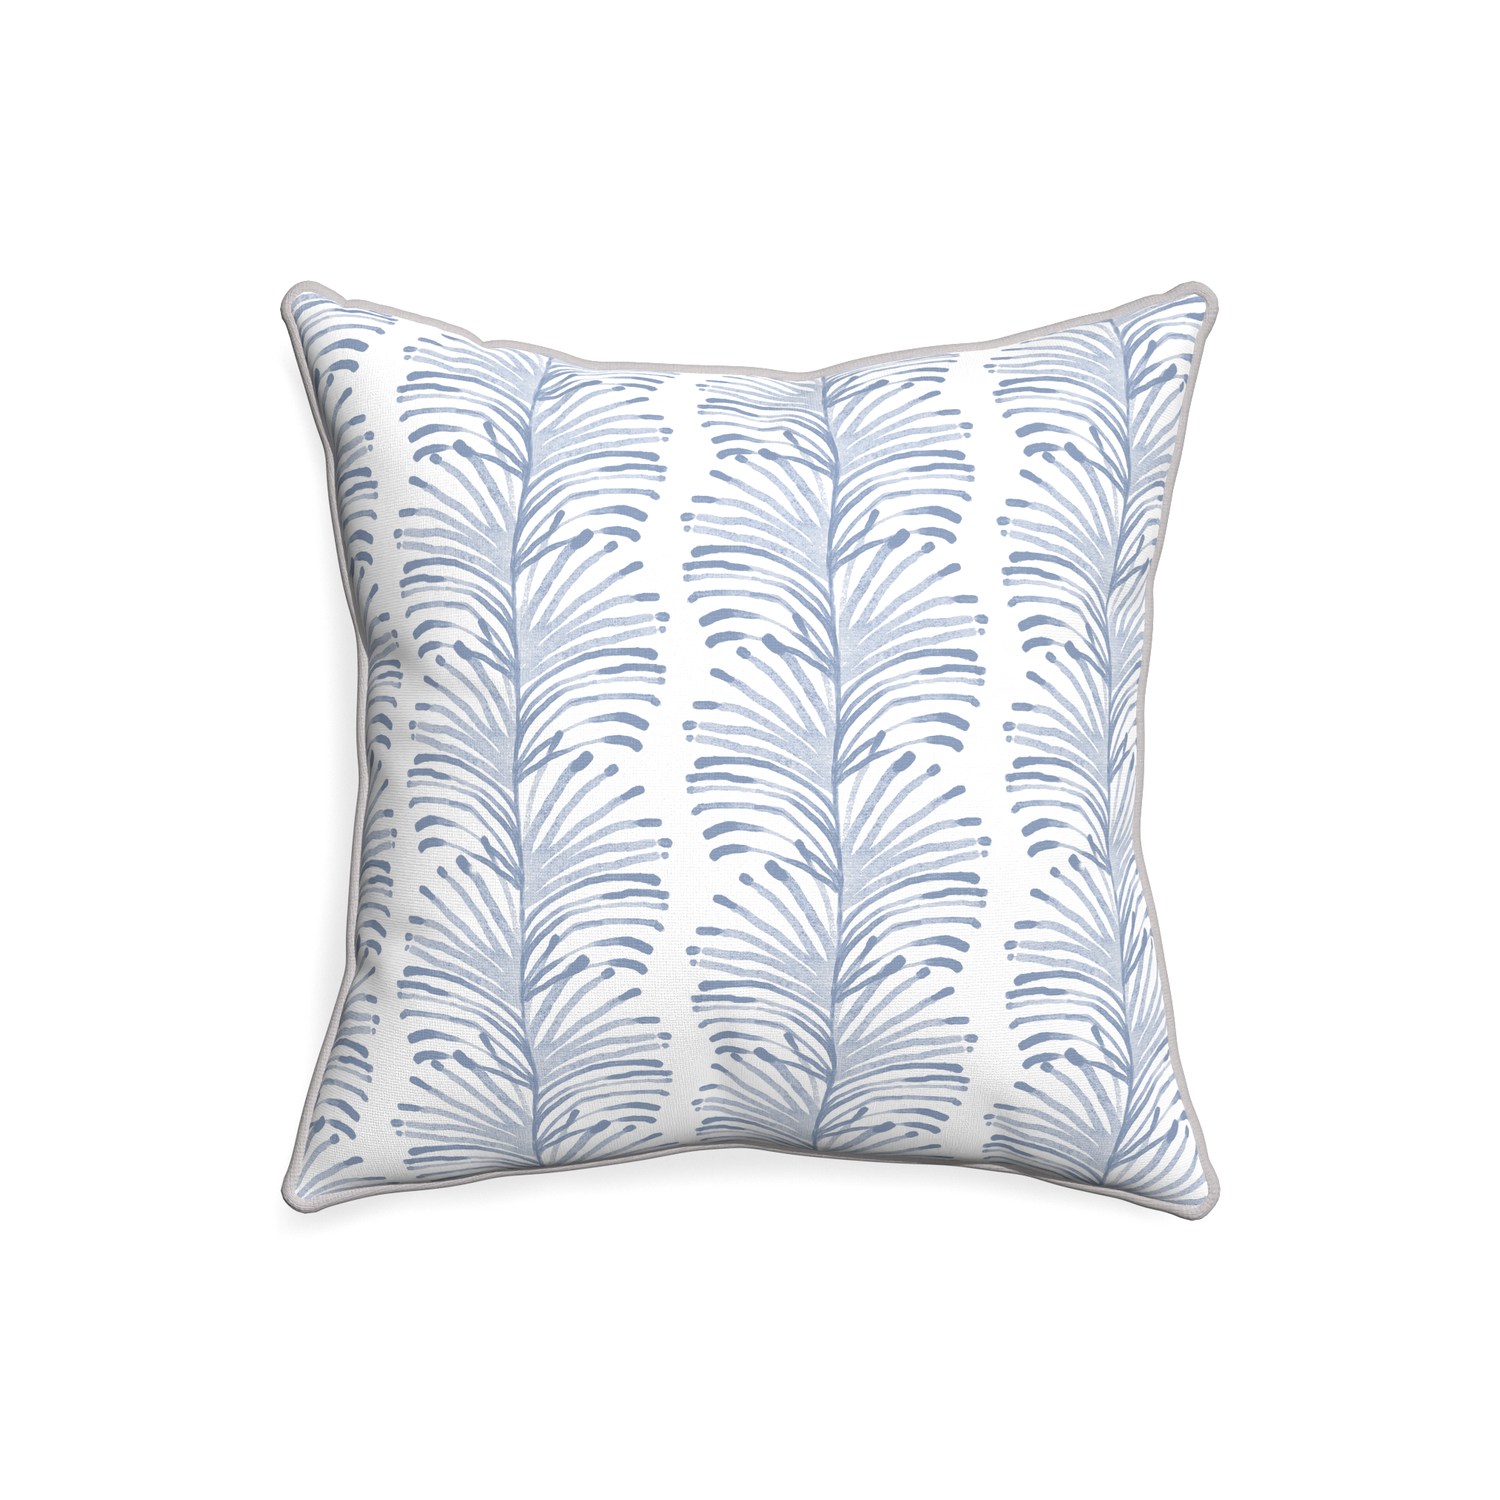 20-square emma sky custom pillow with pebble piping on white background